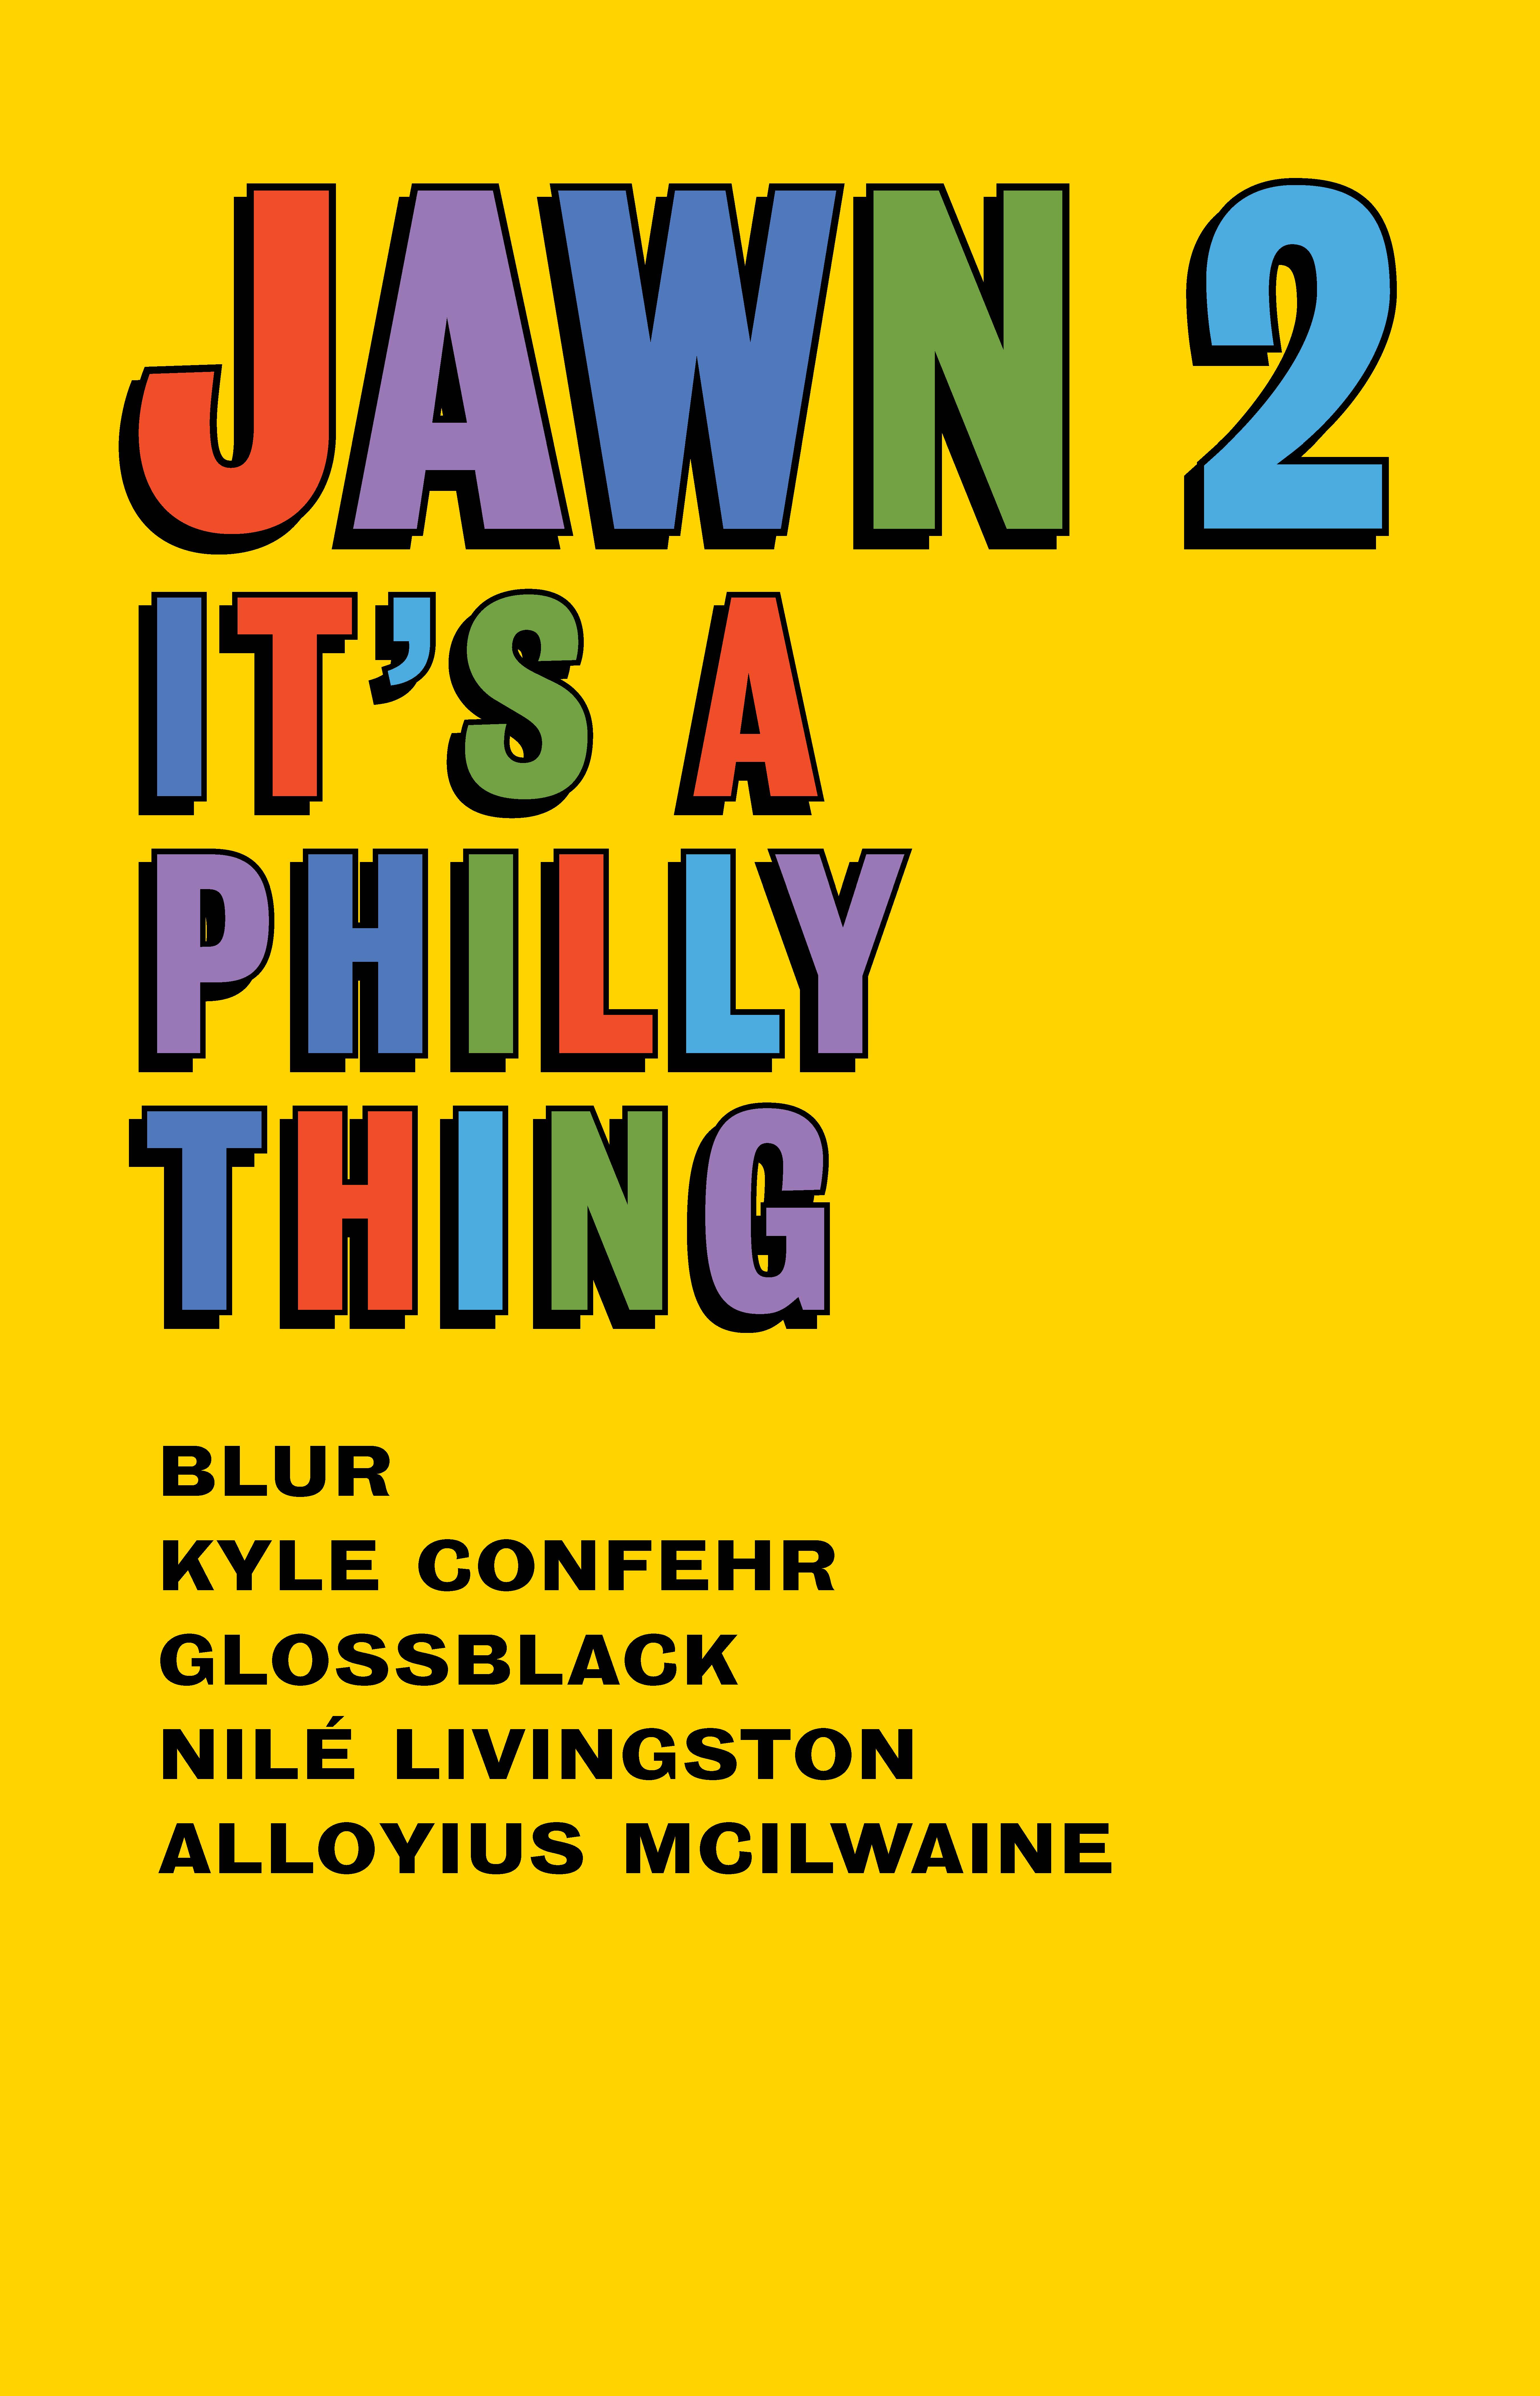 Jawn 2 its' a philly thing display